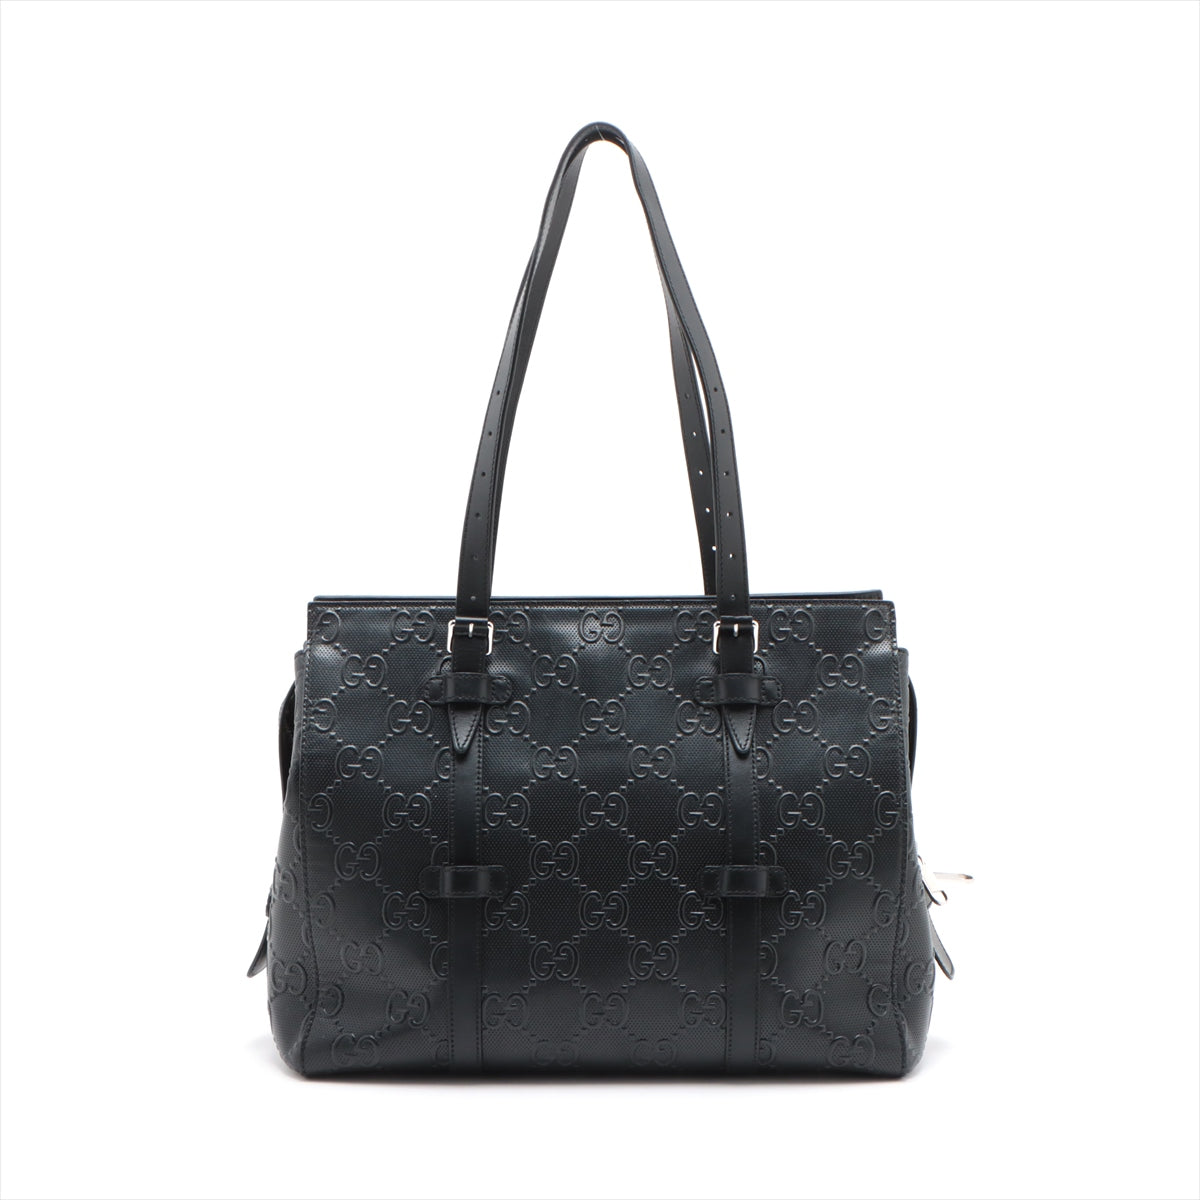 Gucci GG embossed Leather Tote bag Black 625774